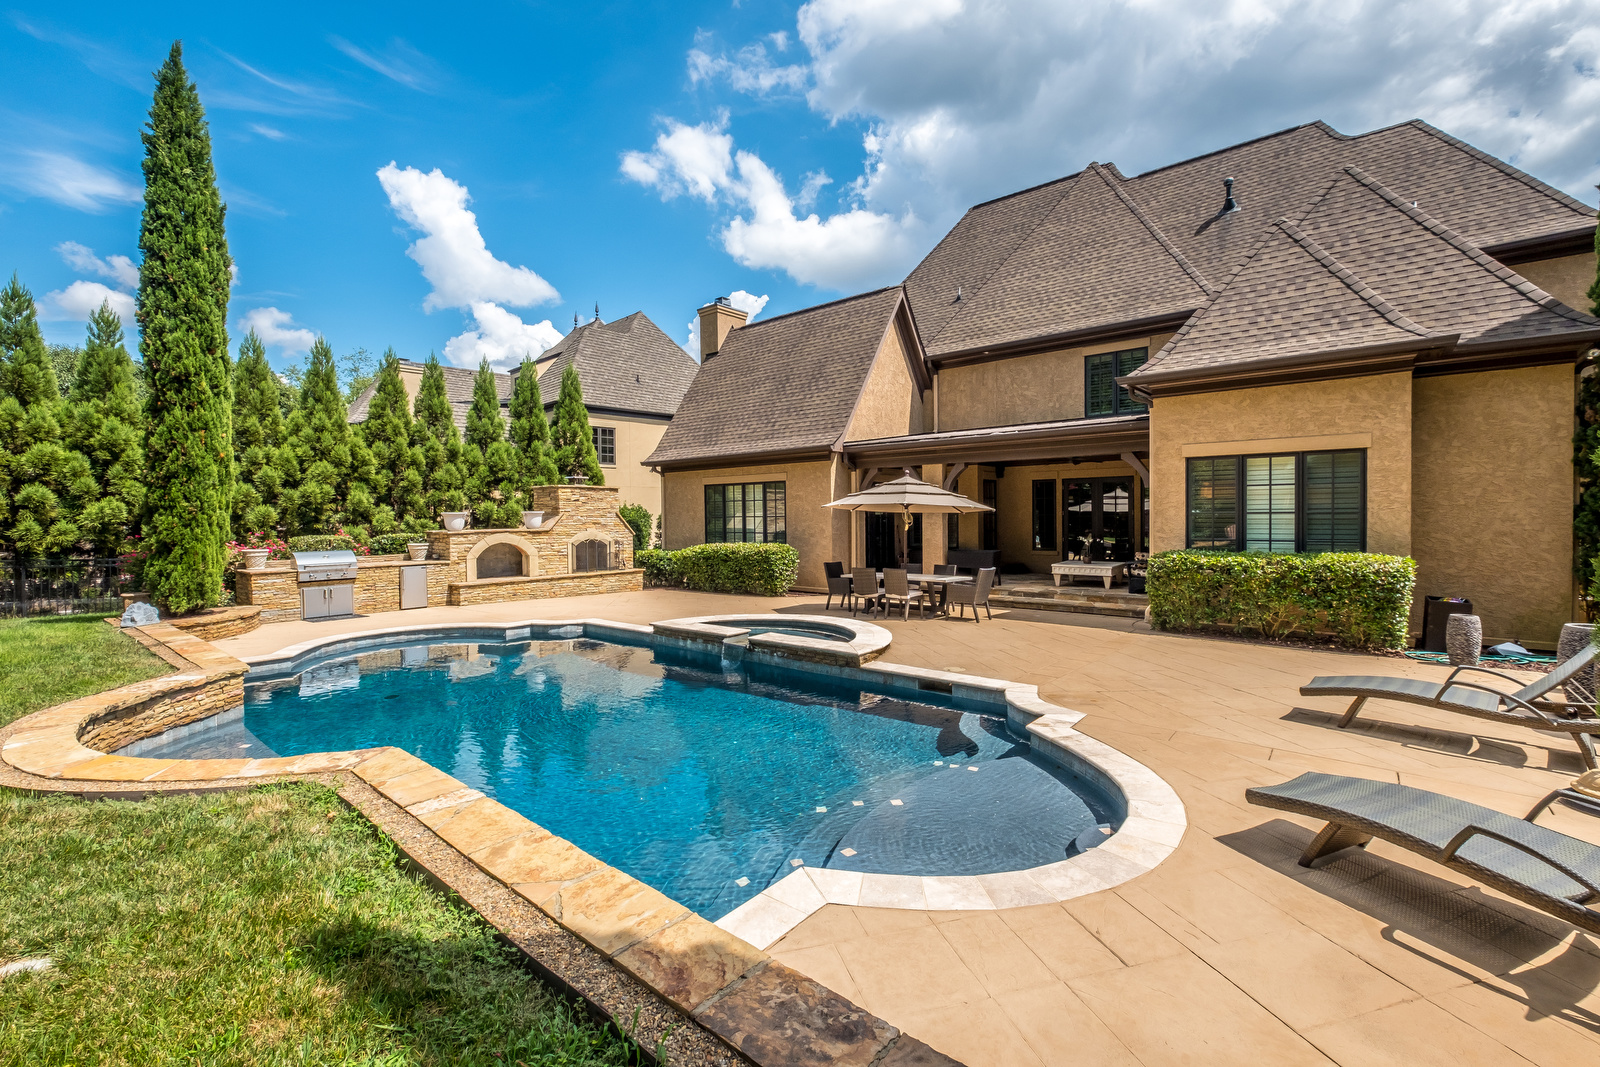 Backyard with pool with stone details eating area hot tub and built in fireplace and grill area with playground in background